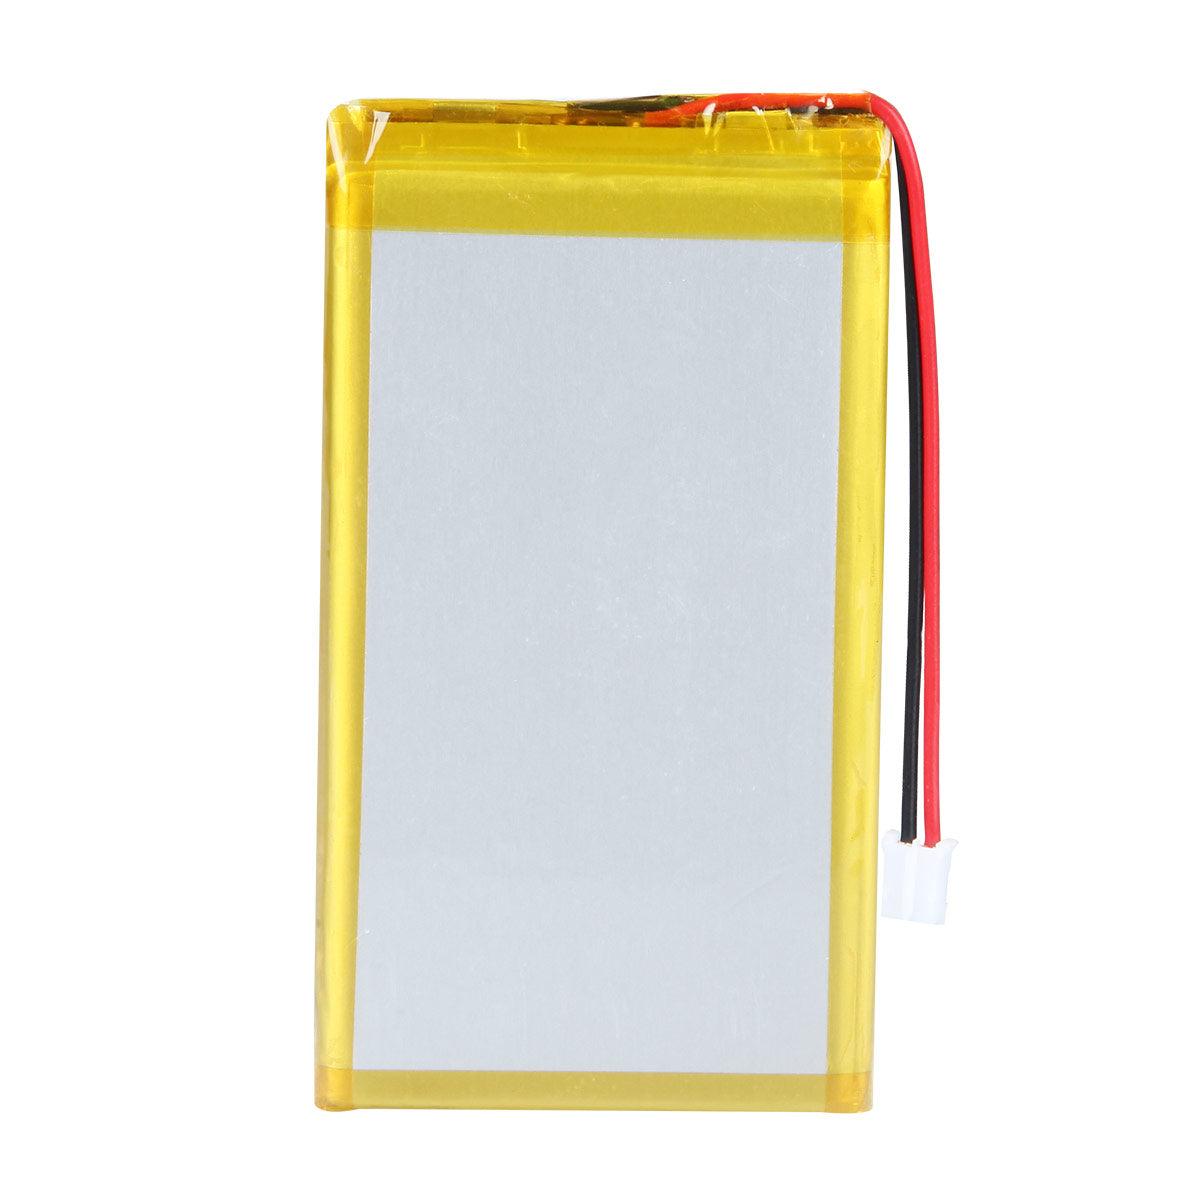 YDL 3.7V 3000mAh 595085 Rechargeable Lithium Polymer Battery